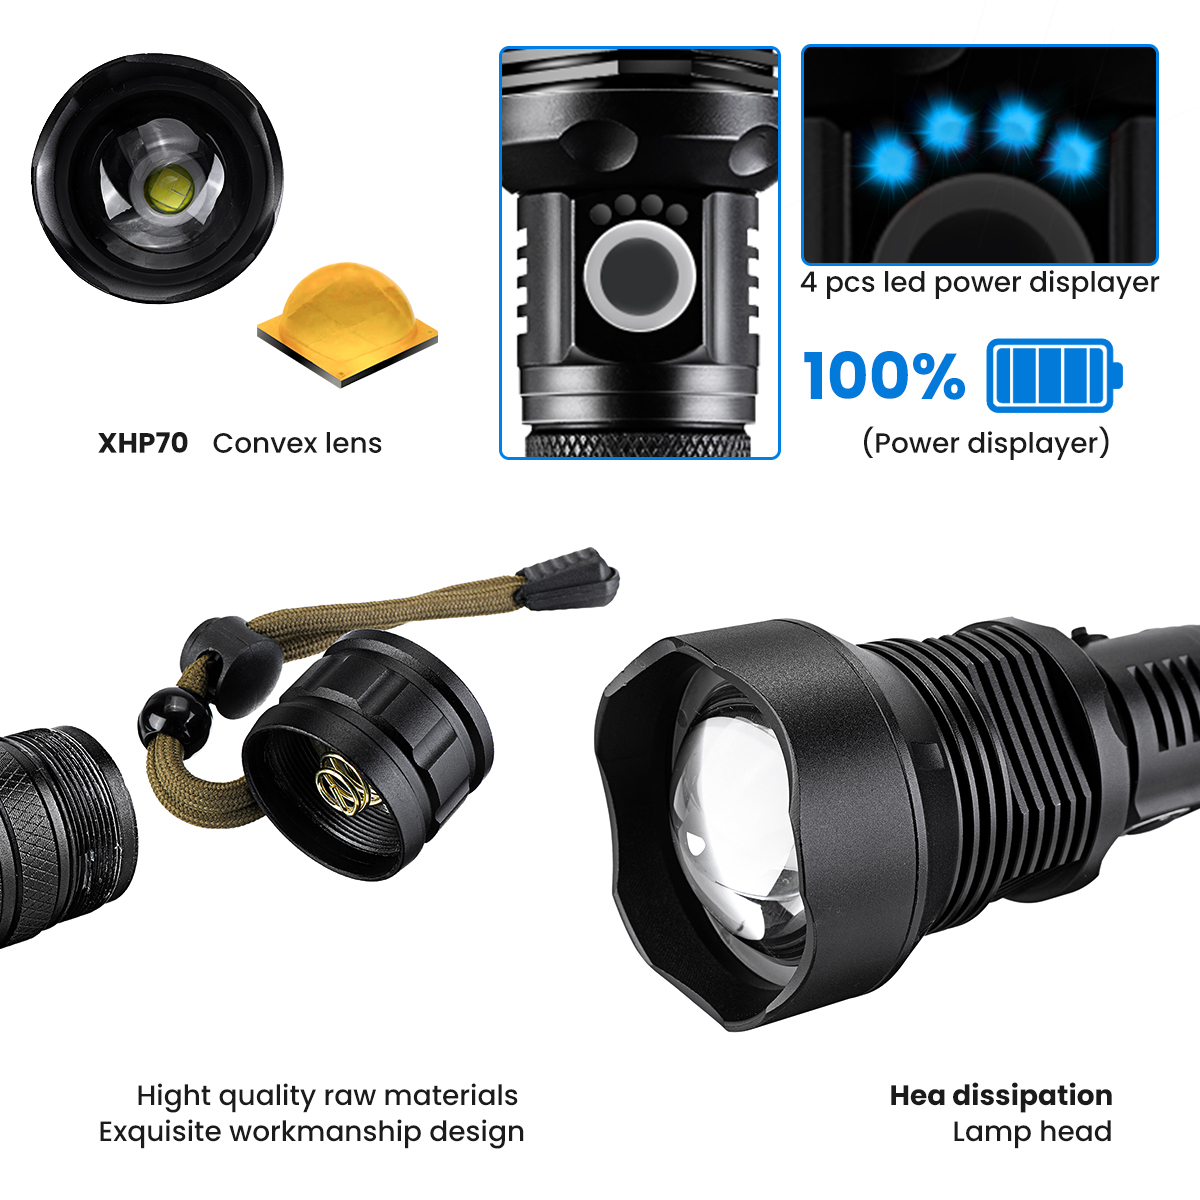 CHARMINER-XPH902-USB-Rechargeable-Handheld-Flashlight-Kit-with-18650-Battery-USB-Cable-Adjustable-Fo-1792185-10